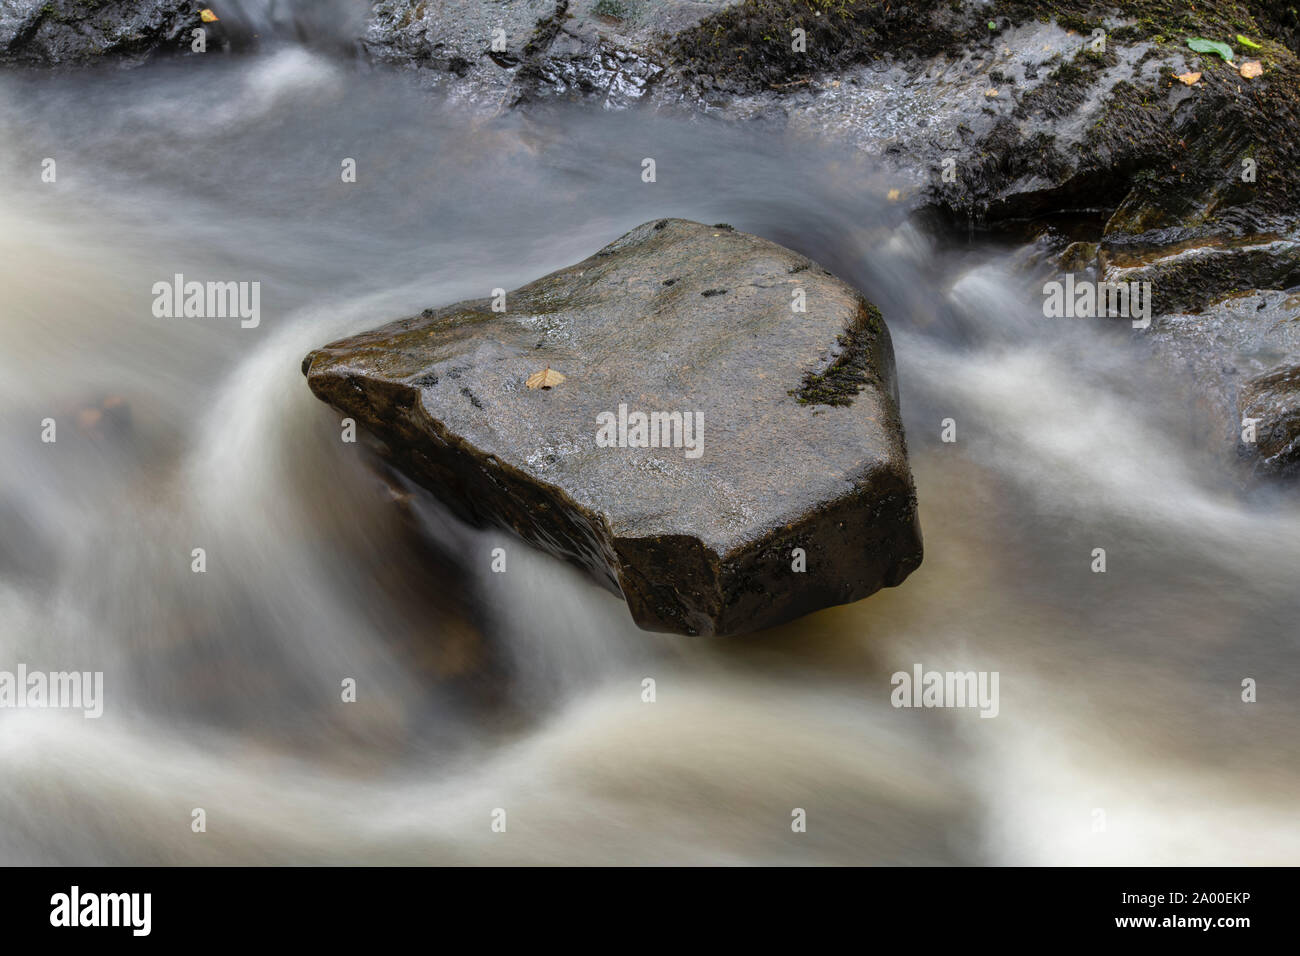 Rock on the Cordorcan burn surrounded by fast flowing water in the Wood Of Cree Nature Reserve, Newton Stewart, Dumfries and Galloway, Scotland Stock Photo